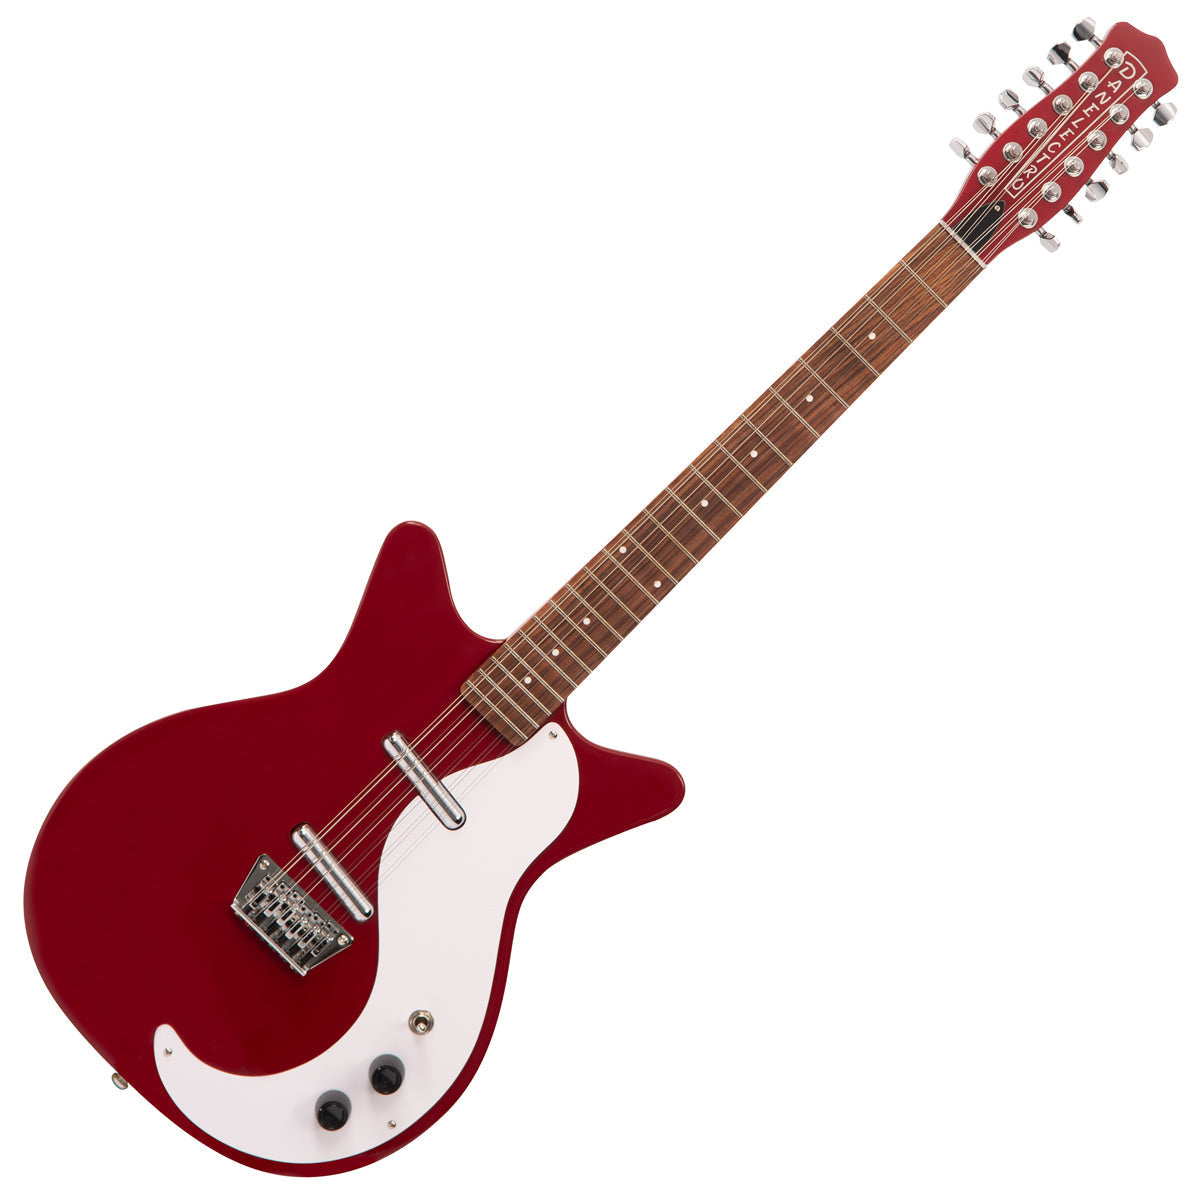 Danelectro '59 12 String Guitar ~ Red, 12 String Electric Guitars for sale at Richards Guitars.